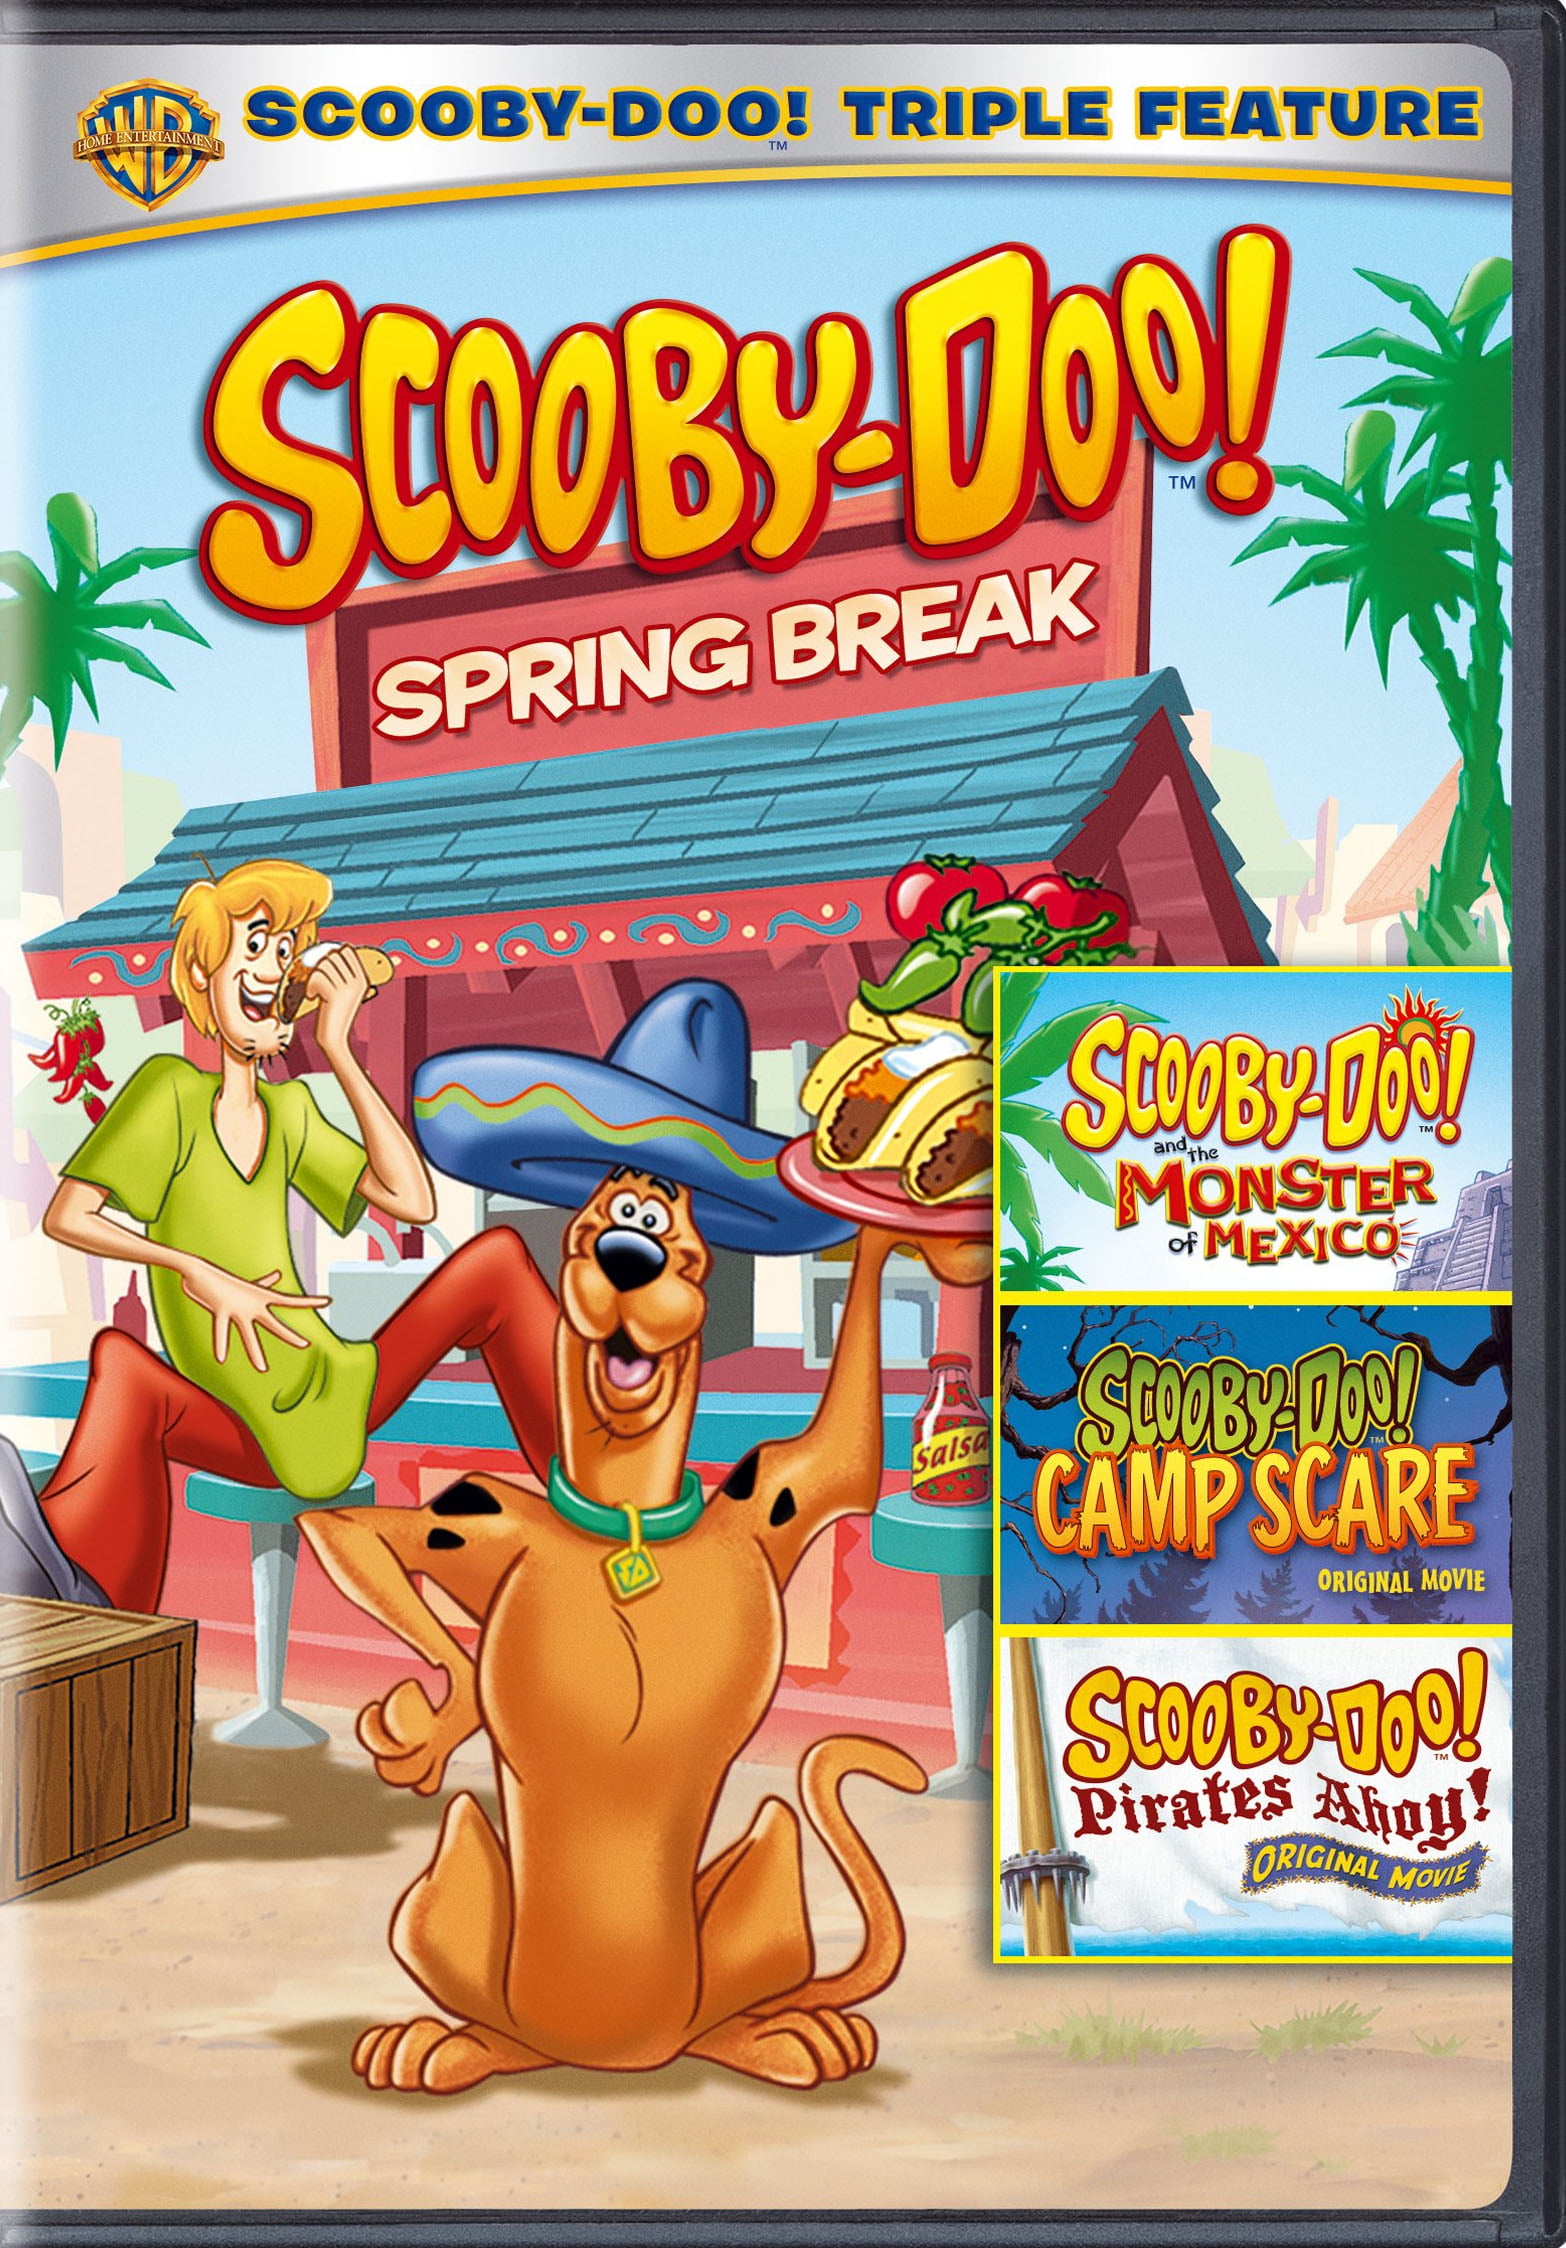 Scooby-Doo Spring Break Triple Feature (Scooby-Doo and the Monster of Mexico / Scooby-Doo Camp Scare / Scooby-Doo Pirates Ahoy!) (DVD)